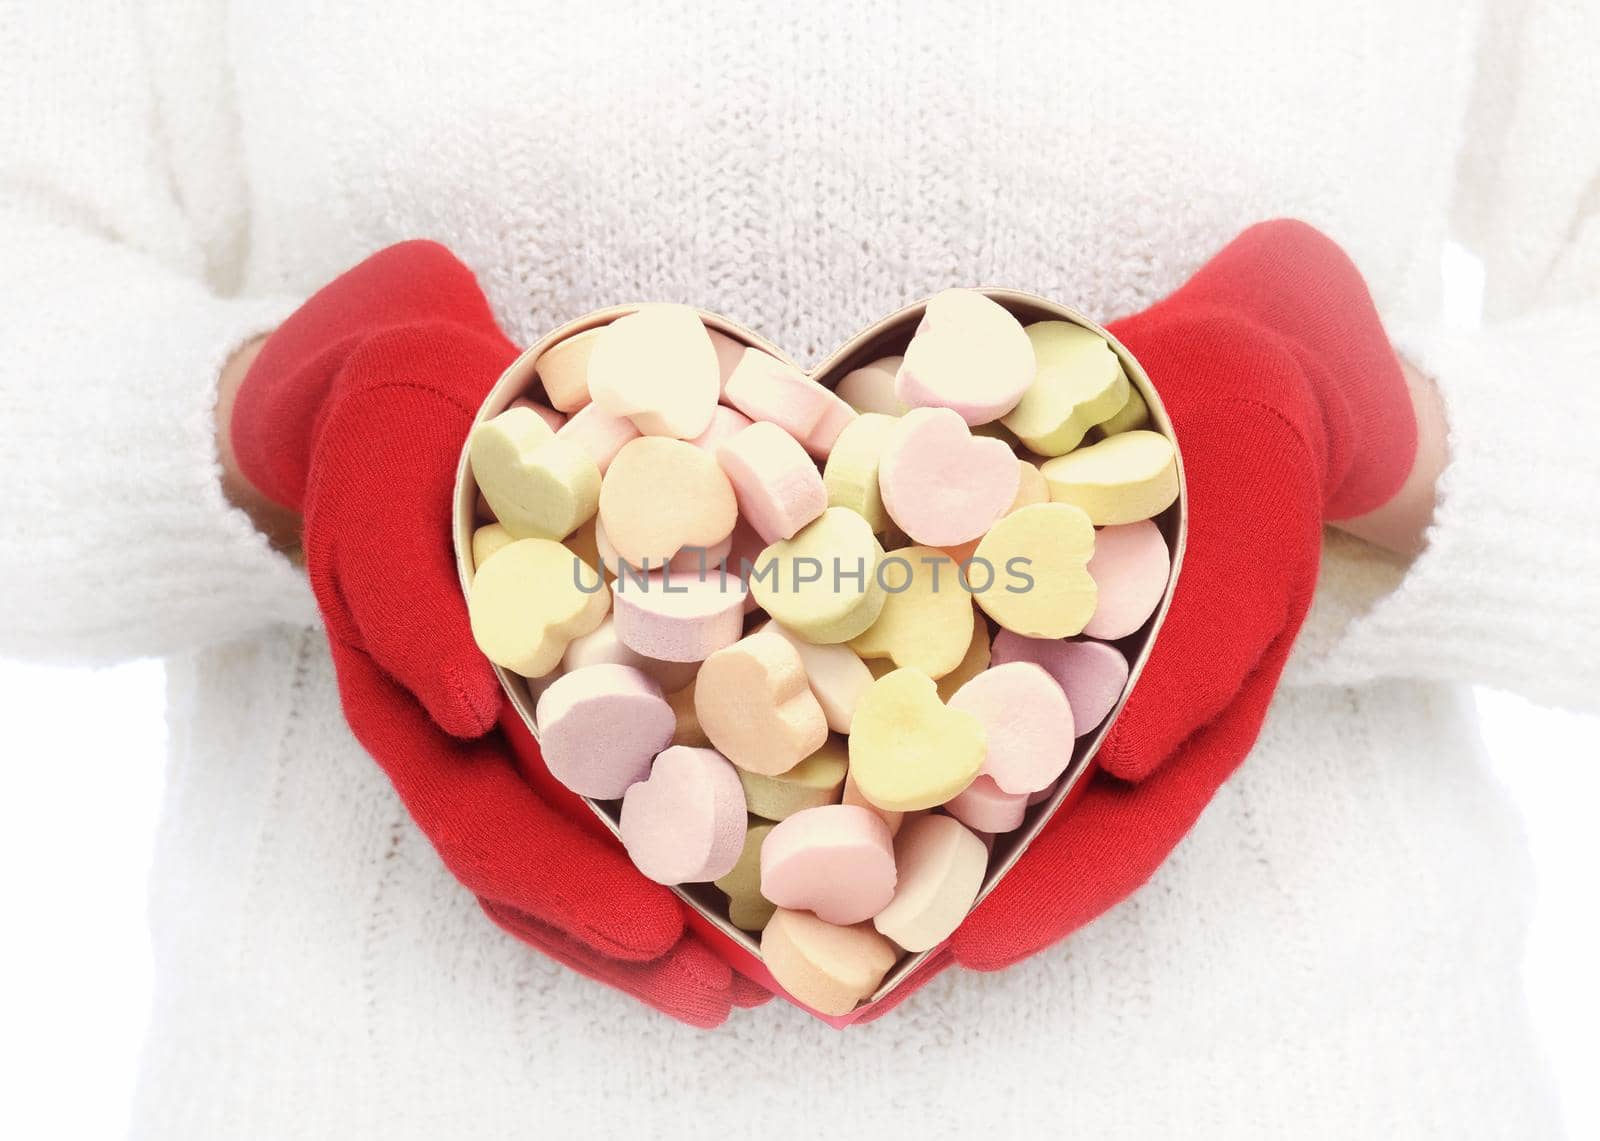 Closeup of a Valentines Day heart shaped box filled with candy hearts. Vignette added as unrecognizable woman holds the box in front of her torso.